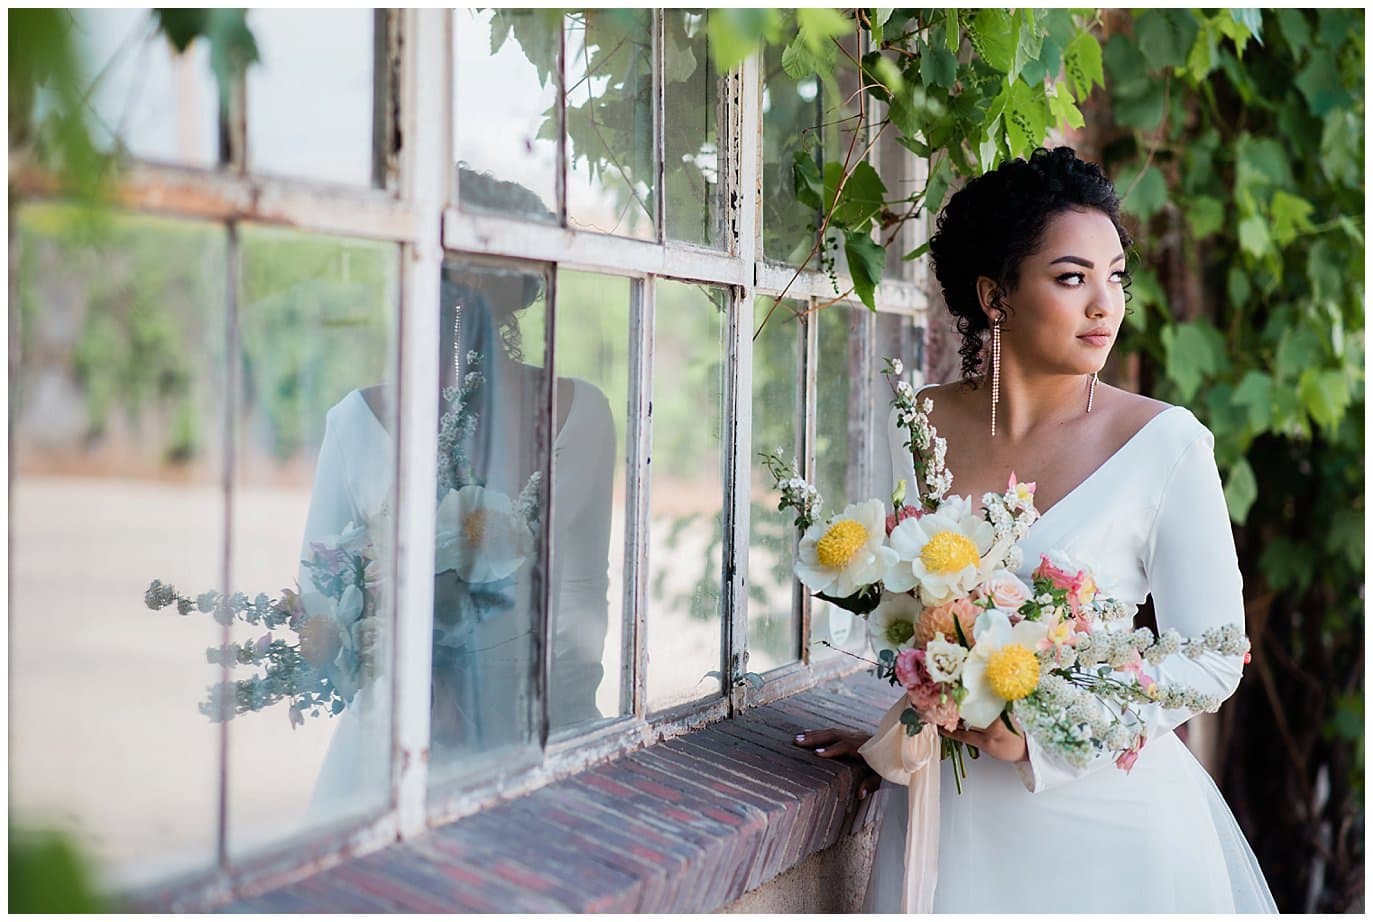 exclusive blue bridal wedding dress on bride on outdoor patio at summer blanc wedding by blanc wedding photographer Jennie Crate photographer